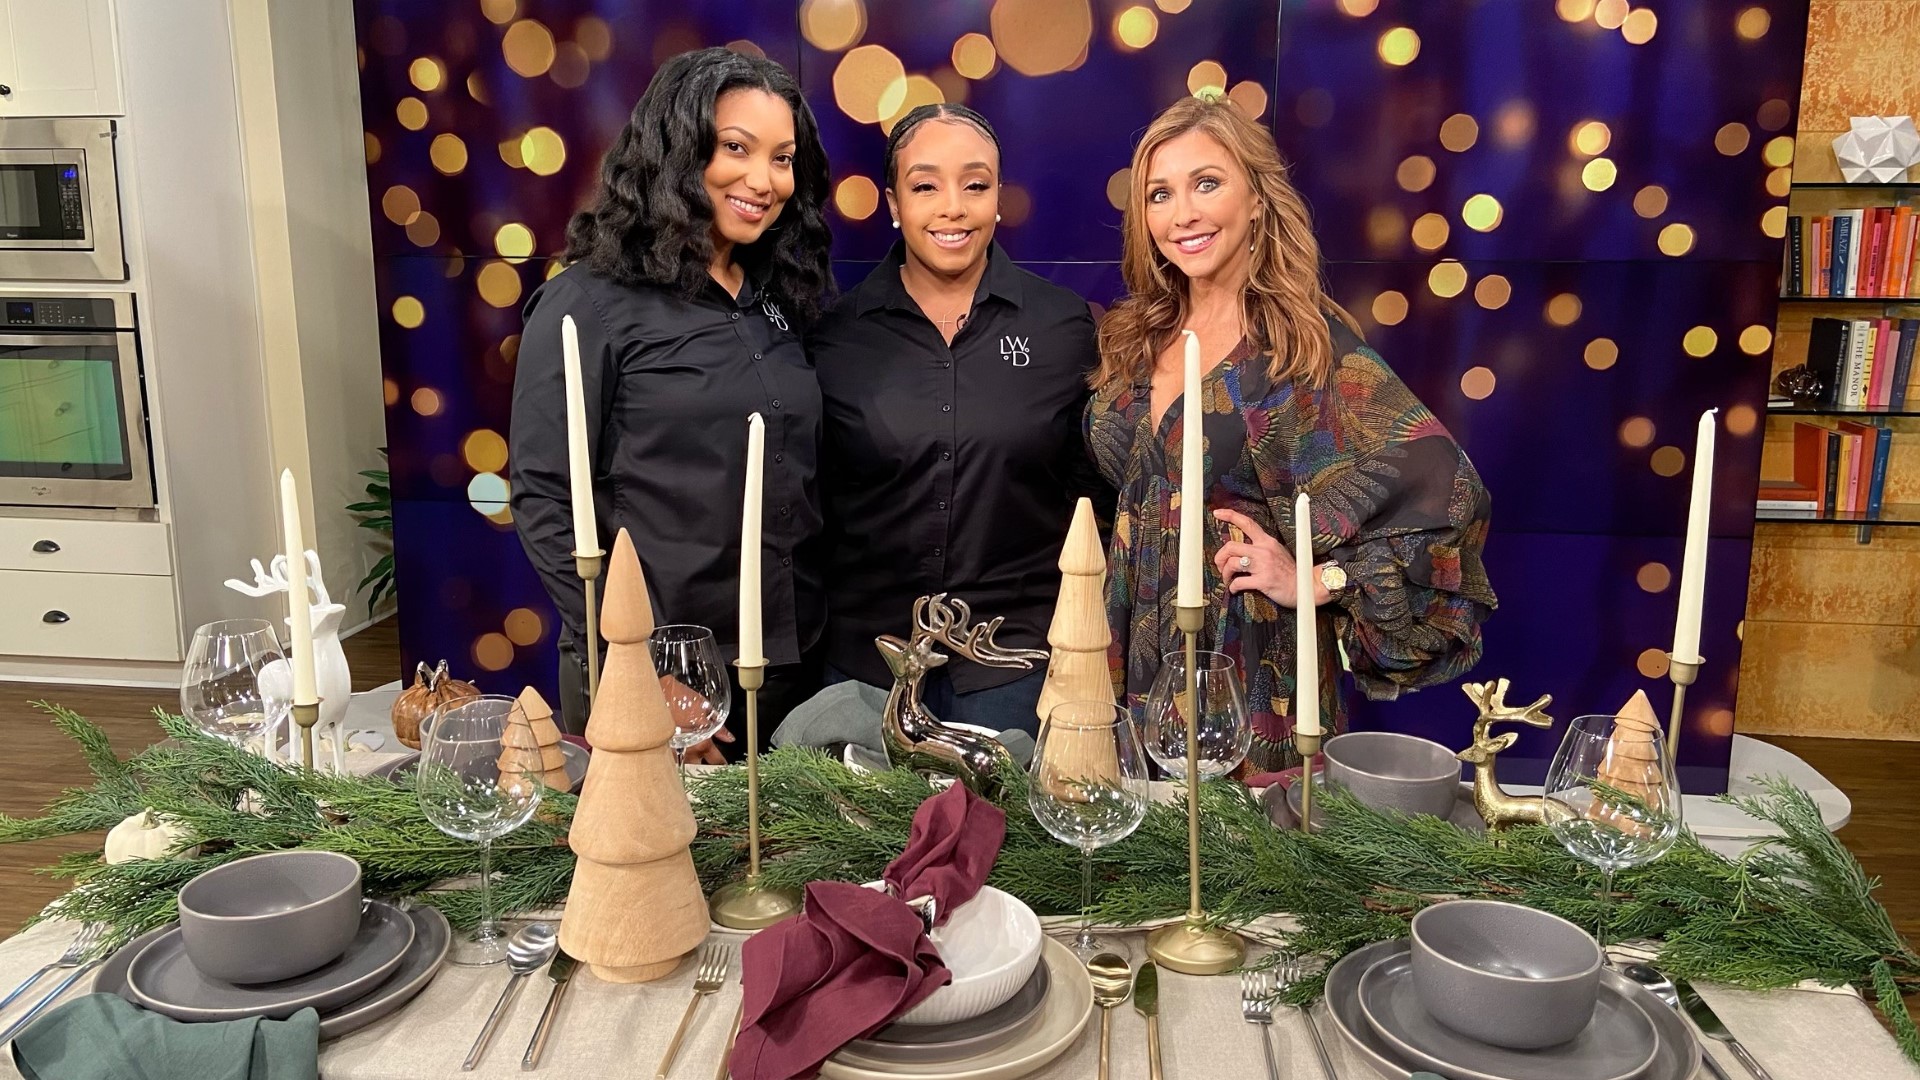 DIY decorating at its finest! Get tips from designers Jameelah Watkins and Ebonee Clark for easy holiday tablescapes.